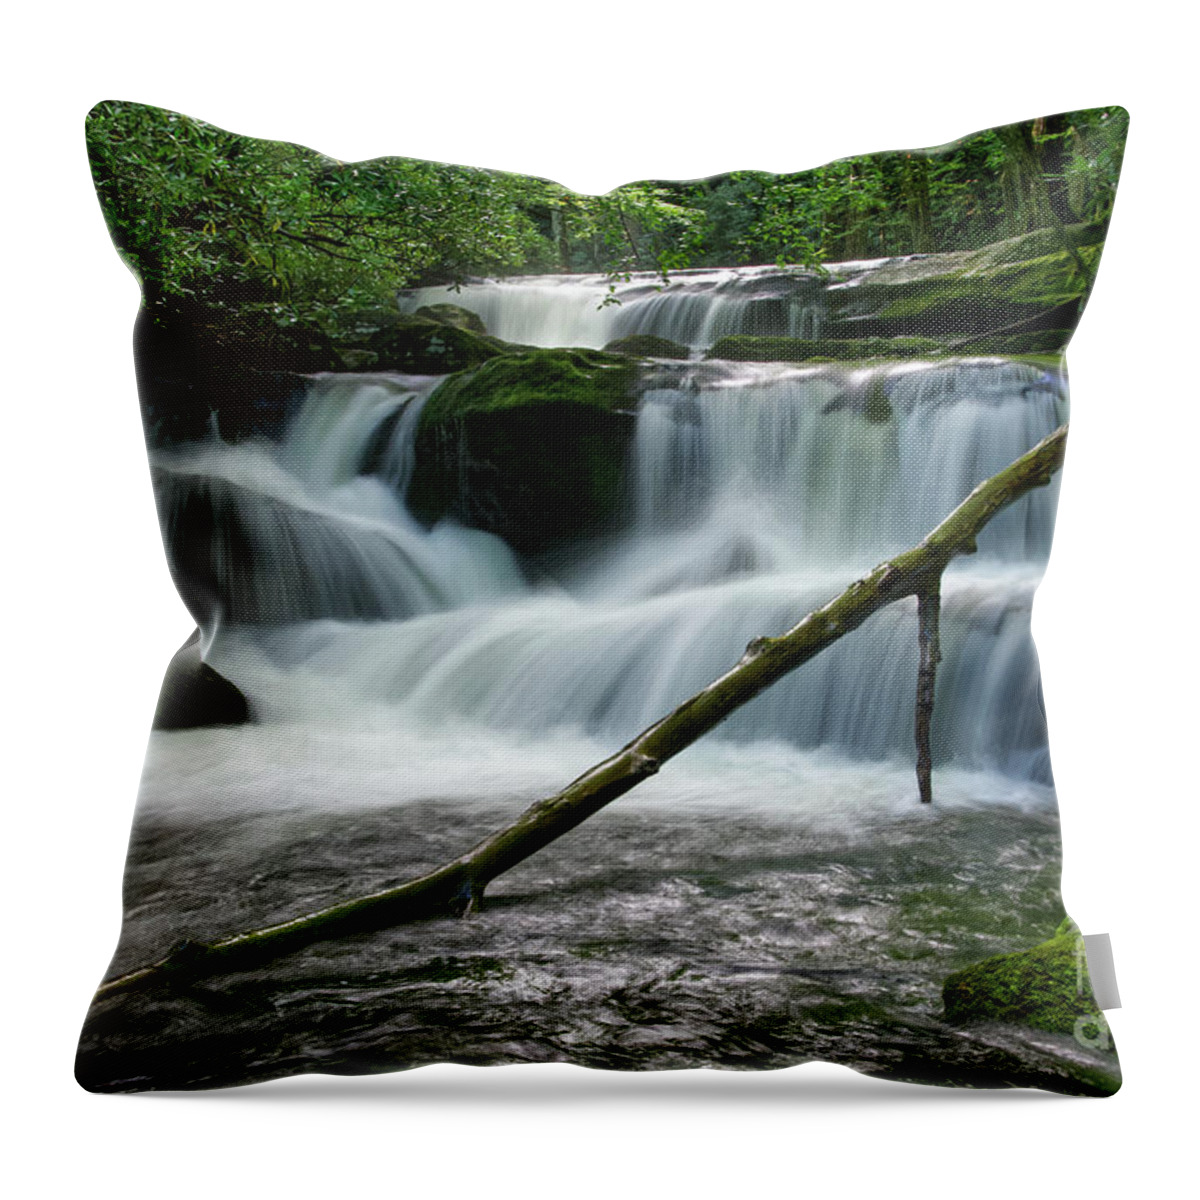 Lynn Camp Prong Throw Pillow featuring the photograph Cascades On Lynn Camp Prong 3 by Phil Perkins